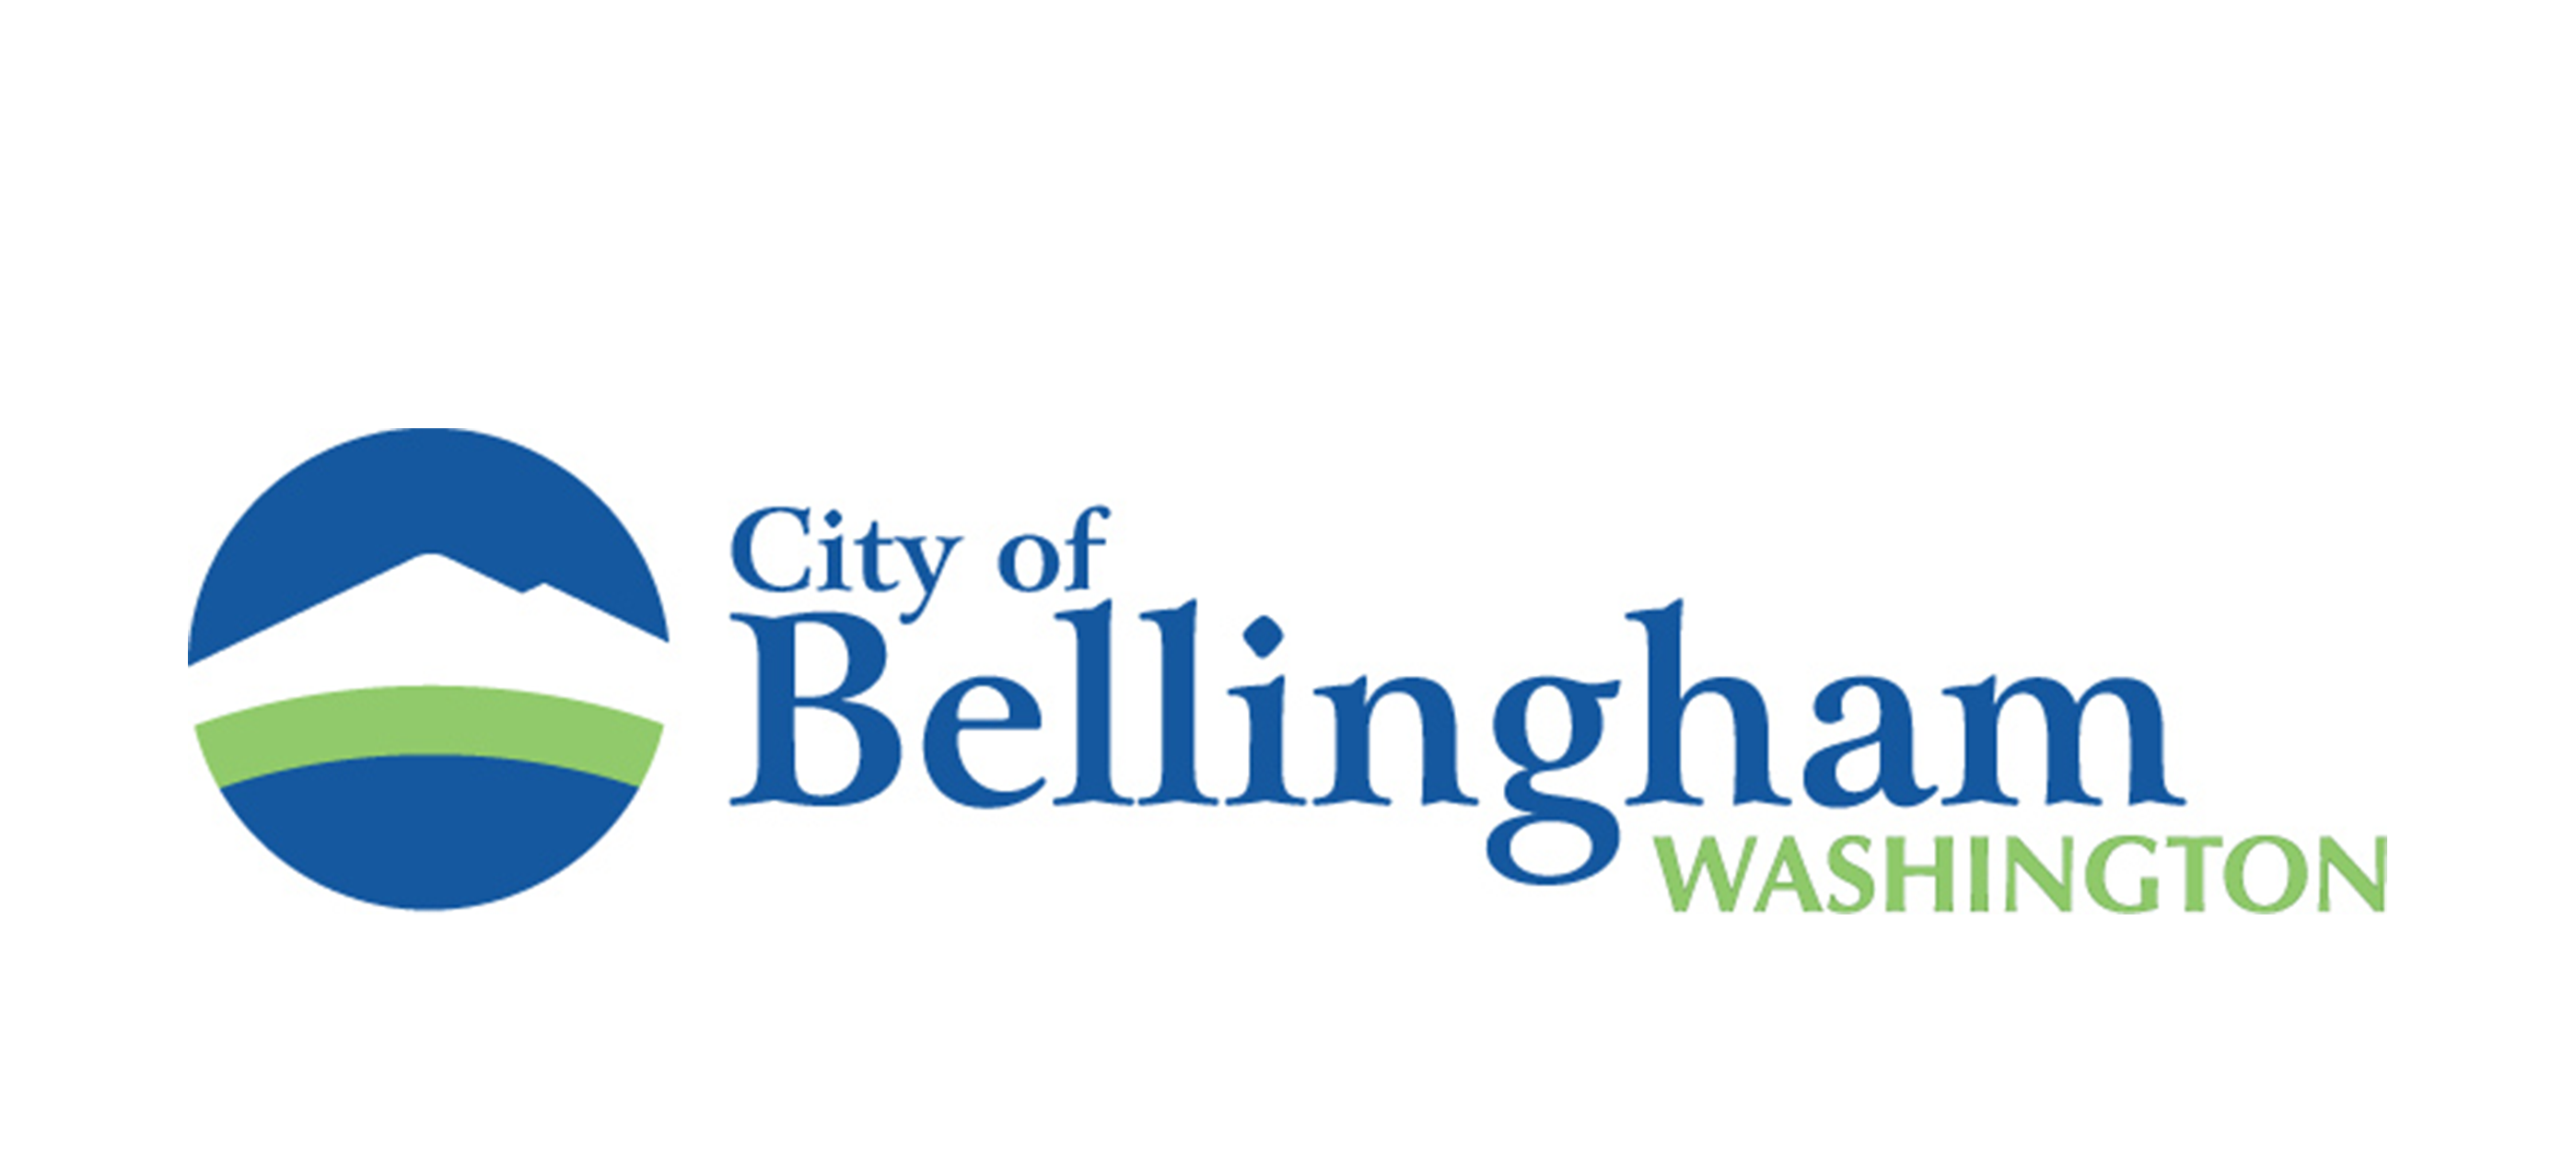 City-of-Bellingham-Resource-Page-Cover-Image_v2